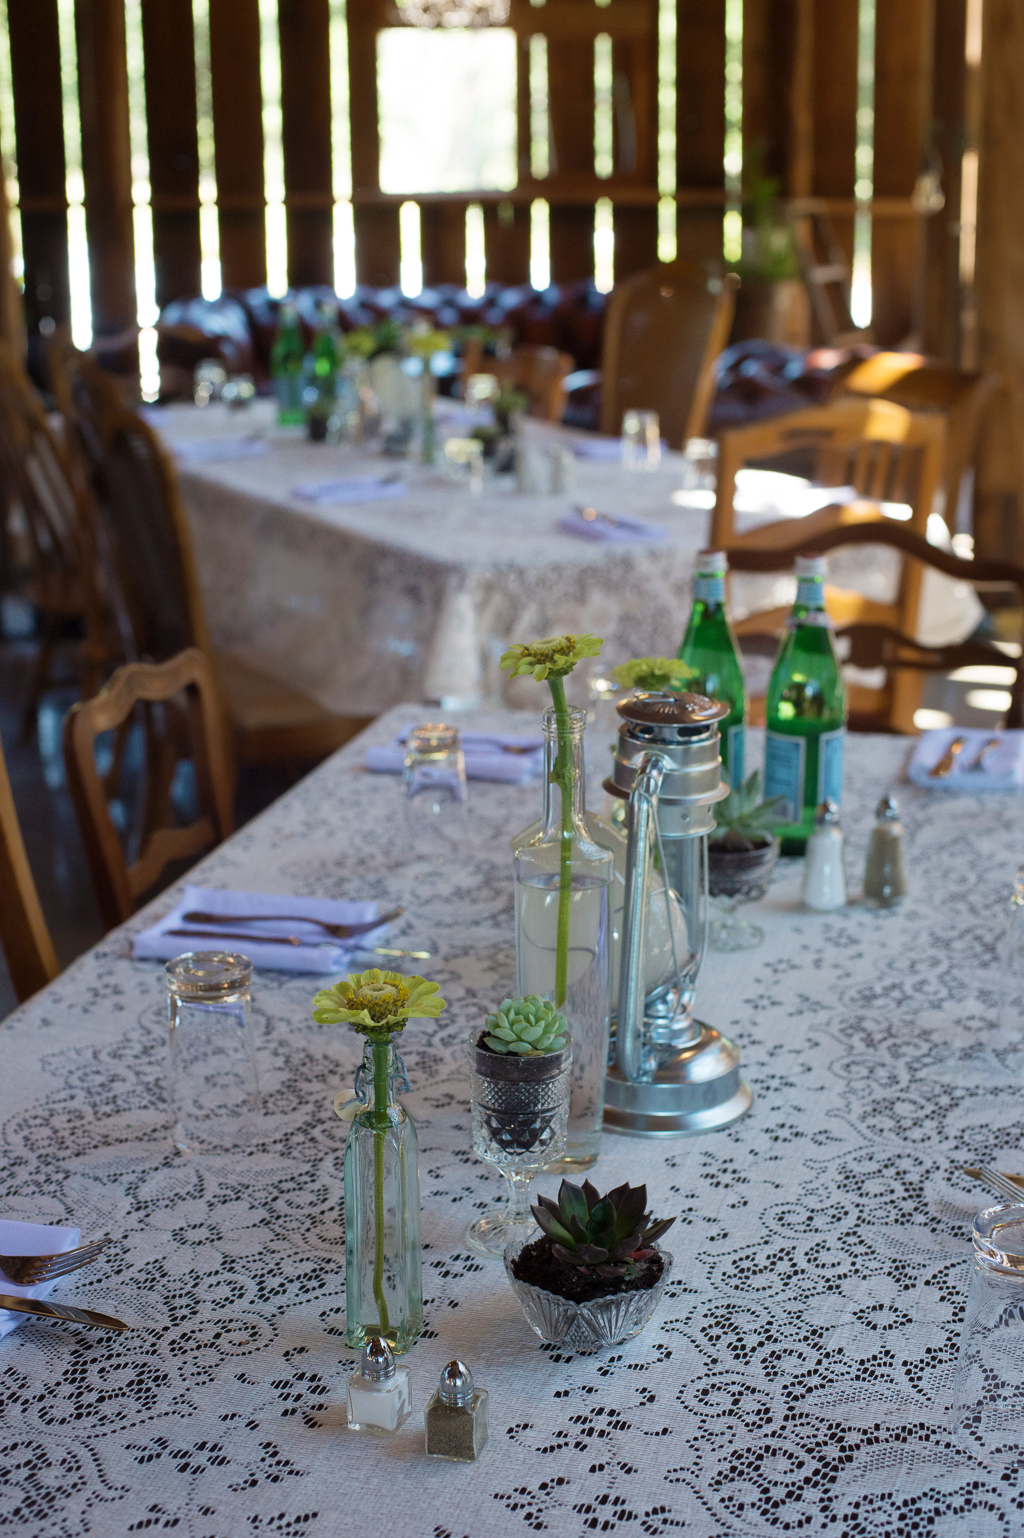 flowers in small glass bottles line the lace covered table at a wedding reception